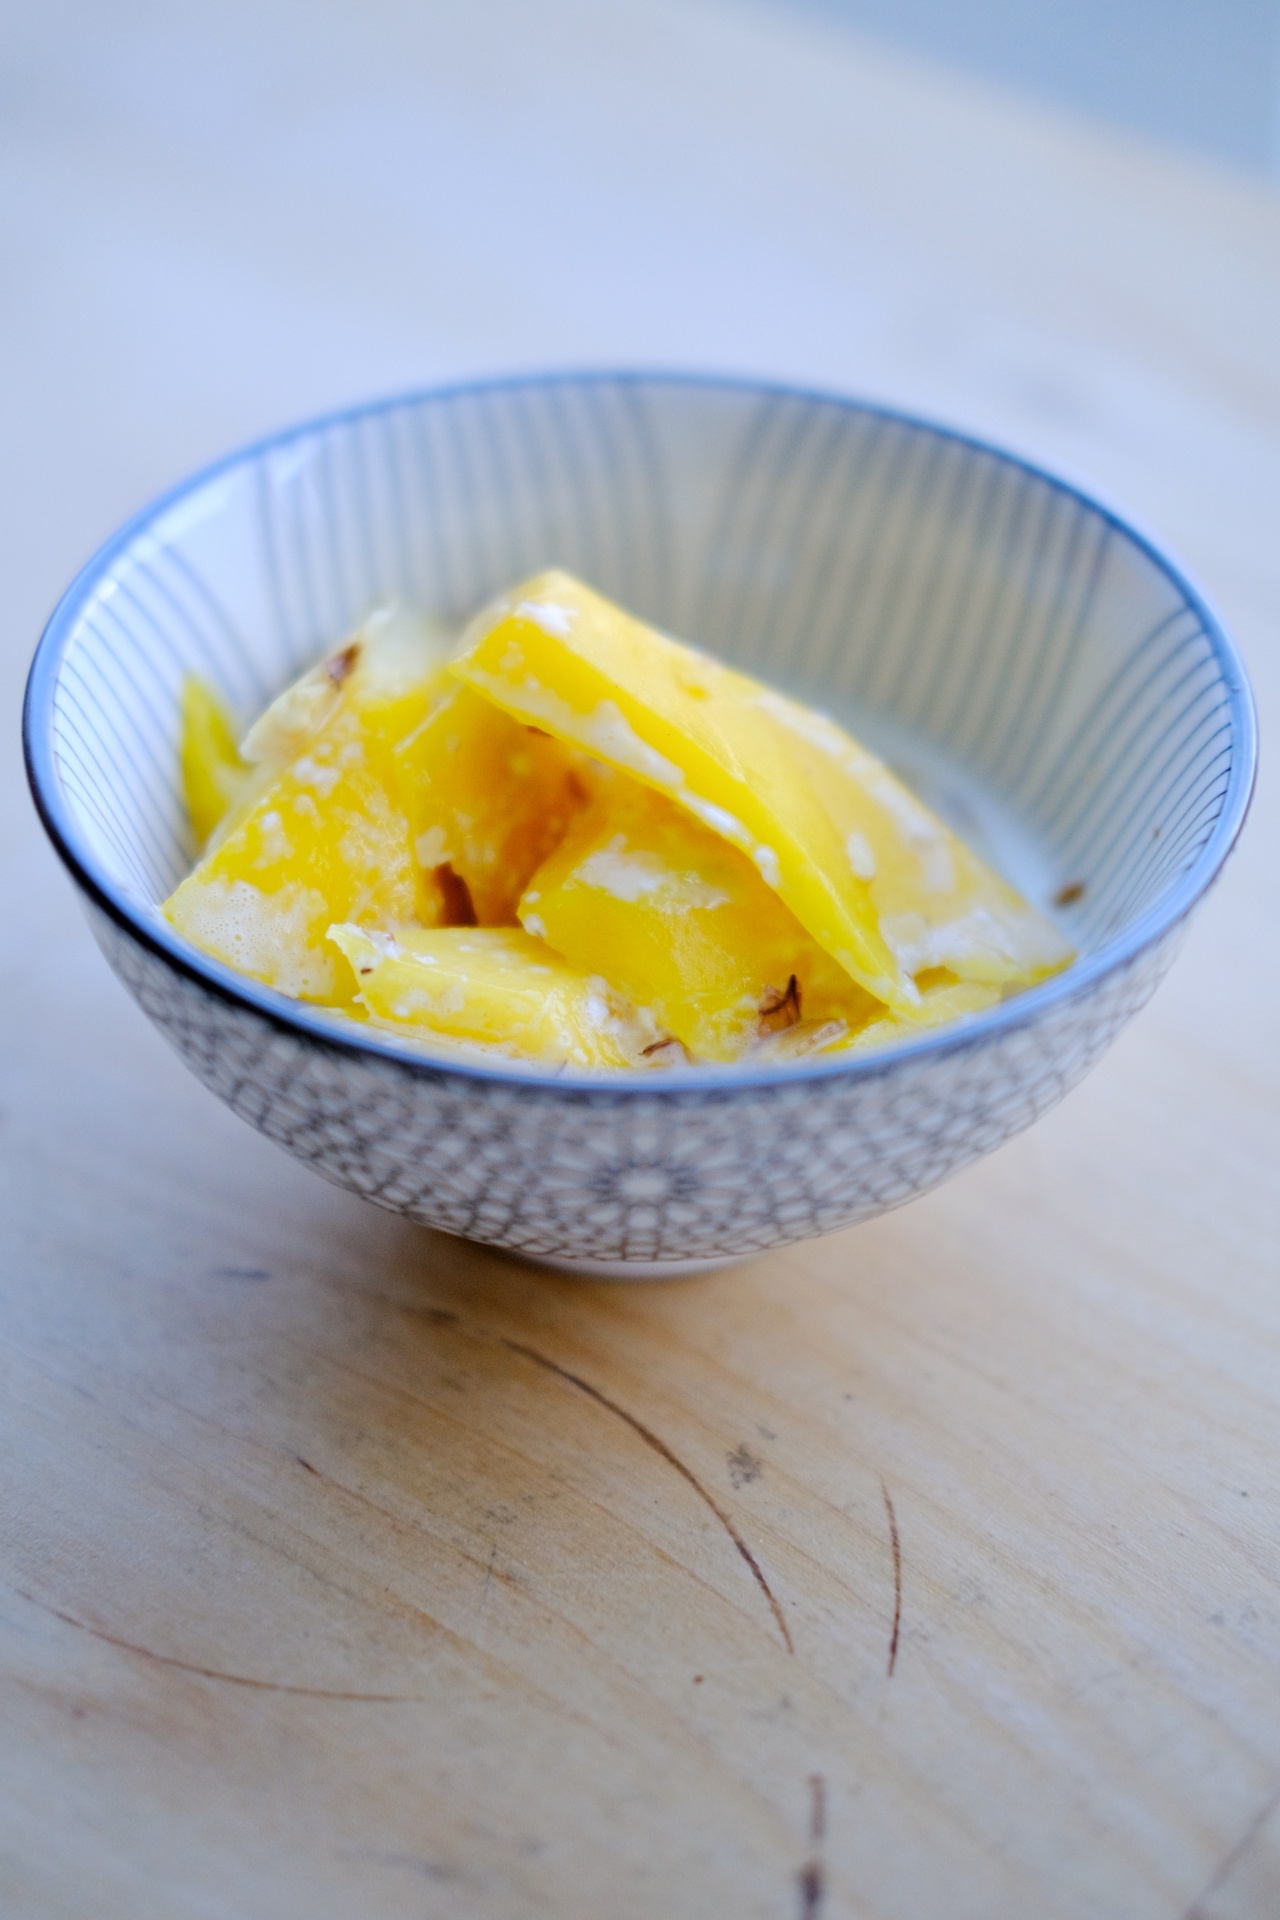 Mangoes in cream from Julie Sahni, served as dessert to the meal for my parents detailed above, Tilburg, 2021.